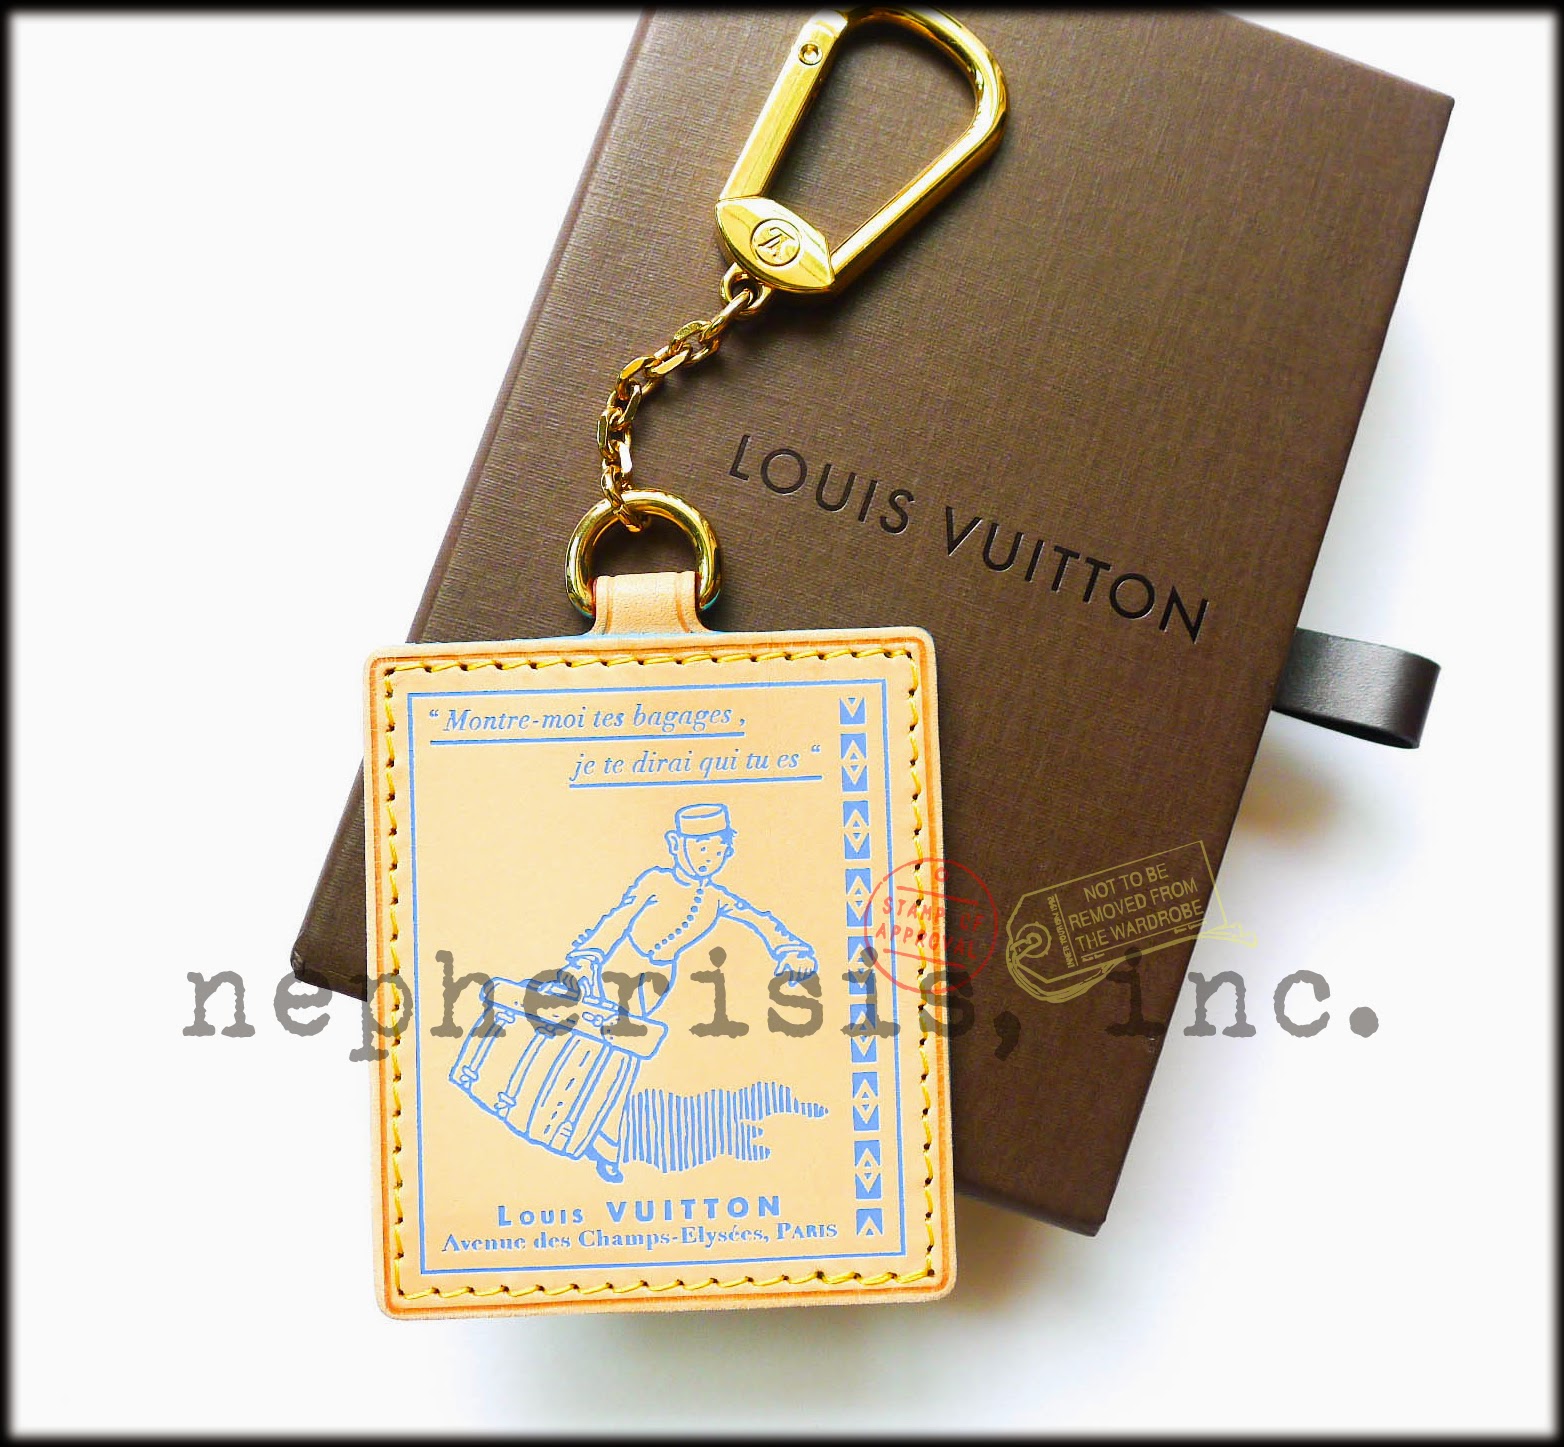 nepherisis, inc. - for the love of authentic luxury handbags and accessories!: Louis Vuitton ...